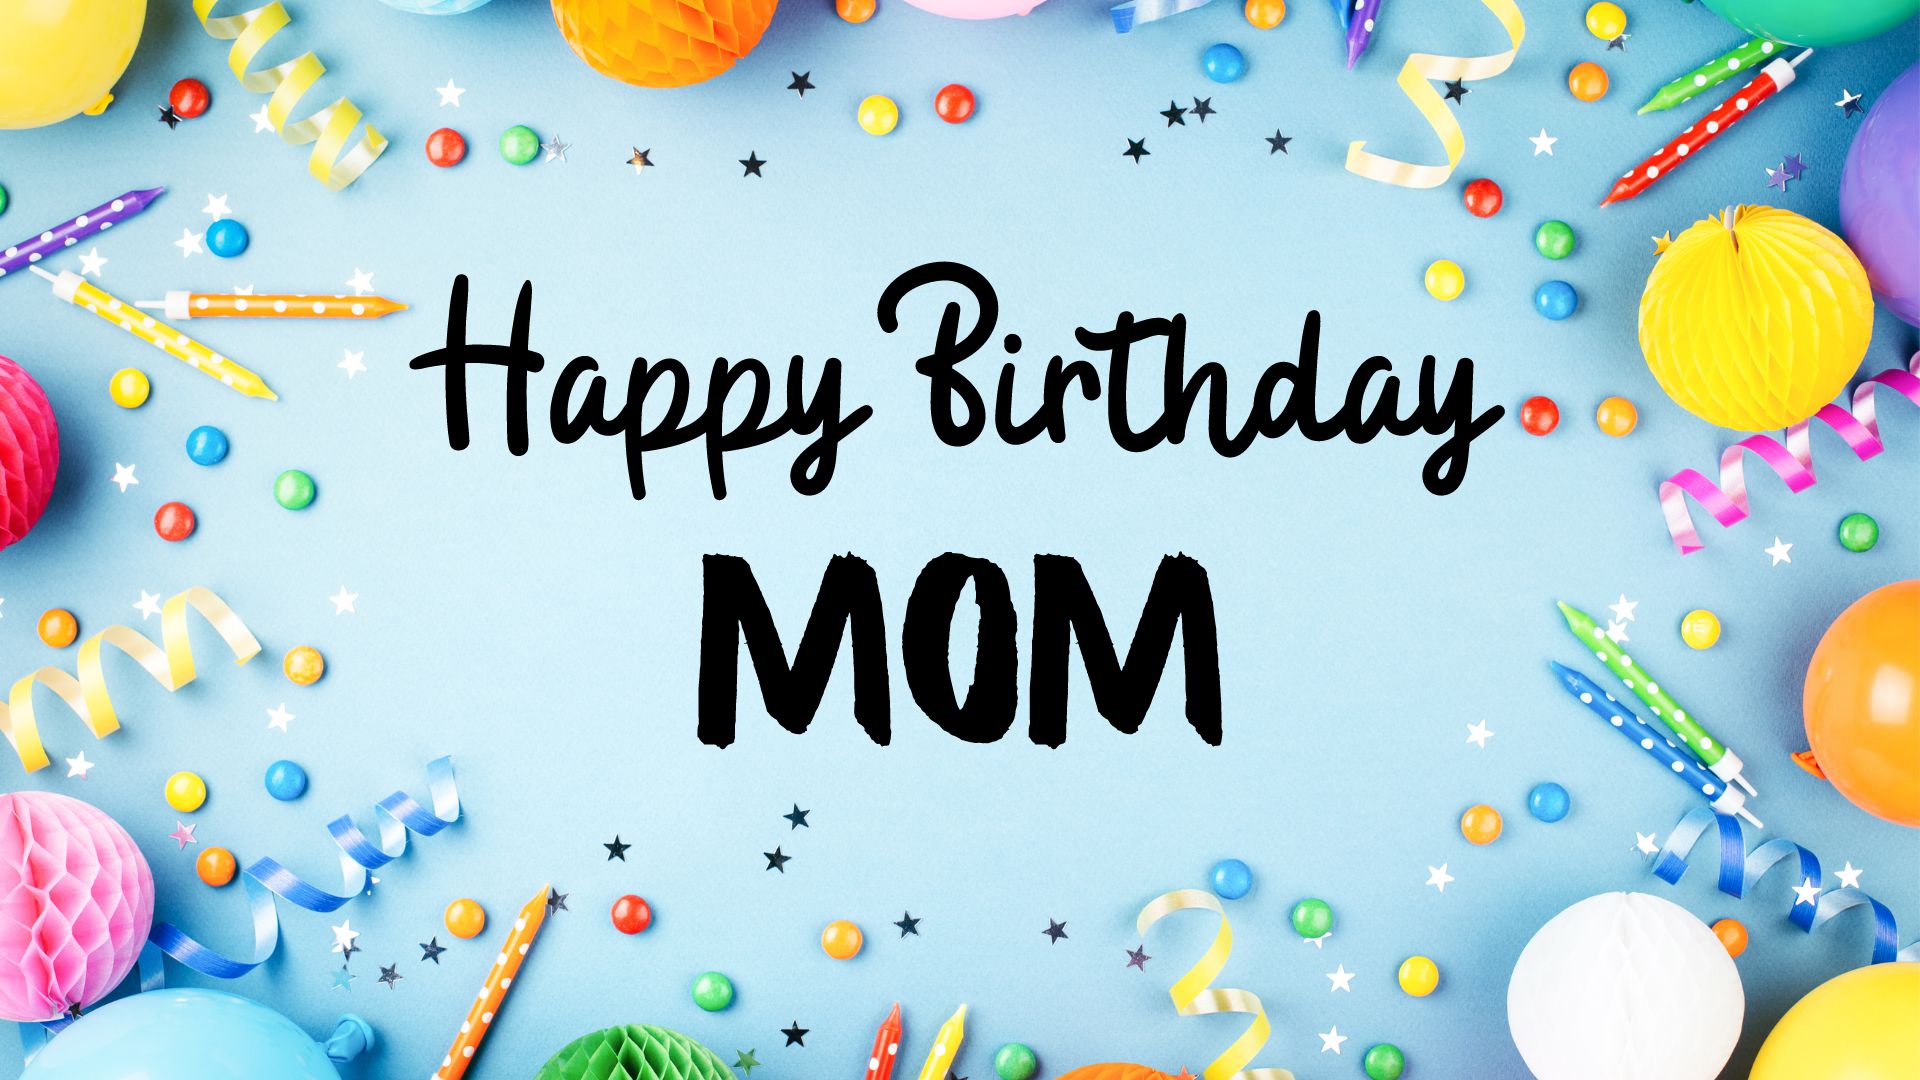 Beautiful Birthday Image For Mother